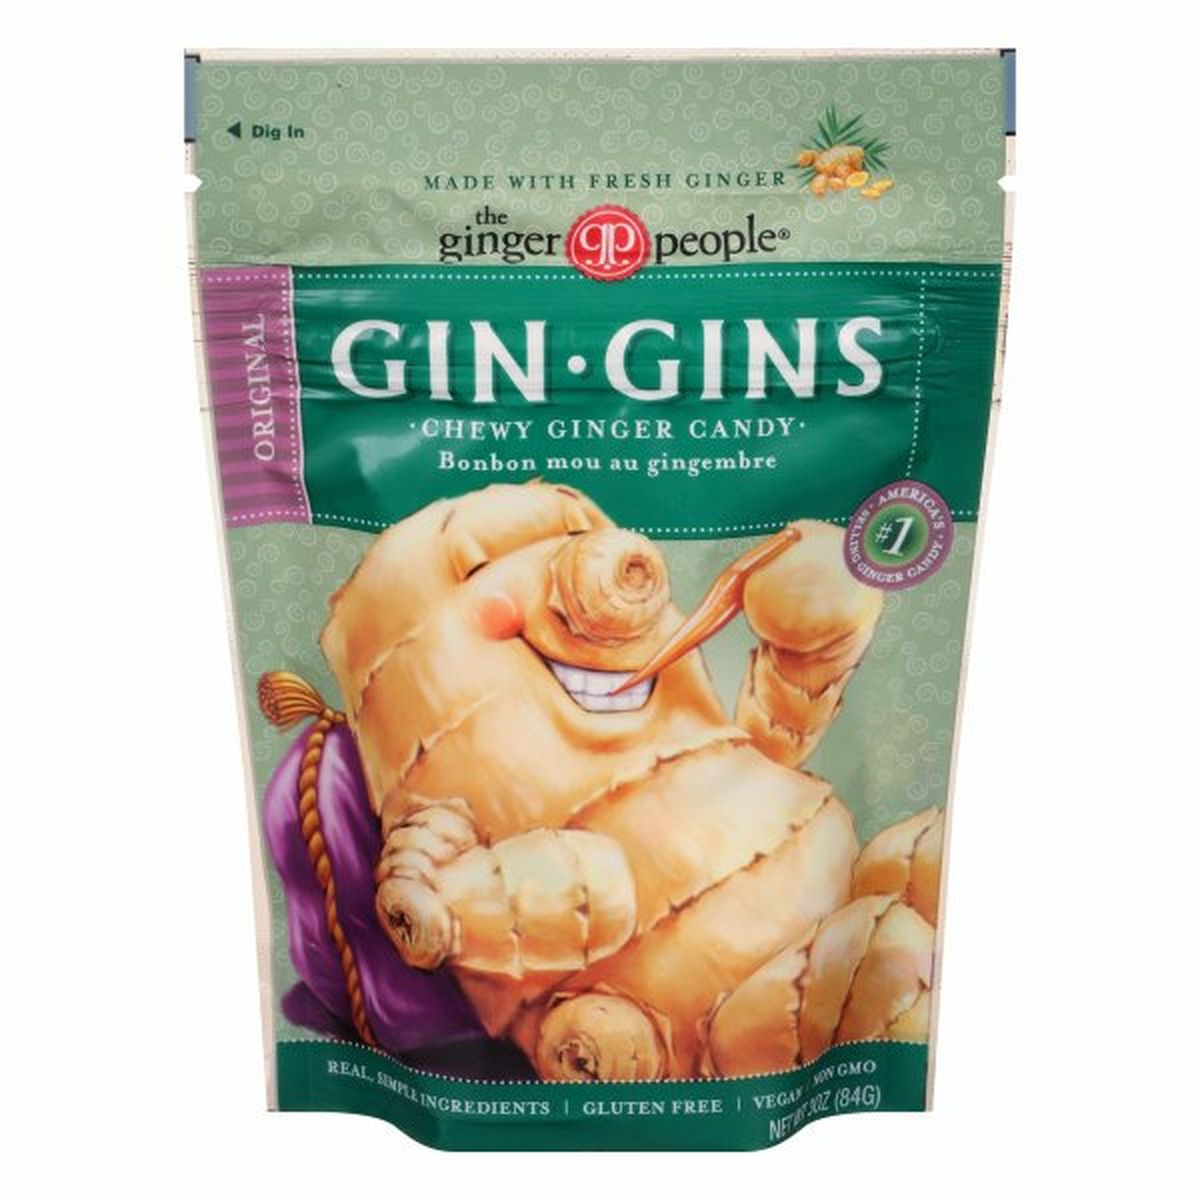 Calories in The Ginger People Gin Gins Ginger Candy, Original, Chewy